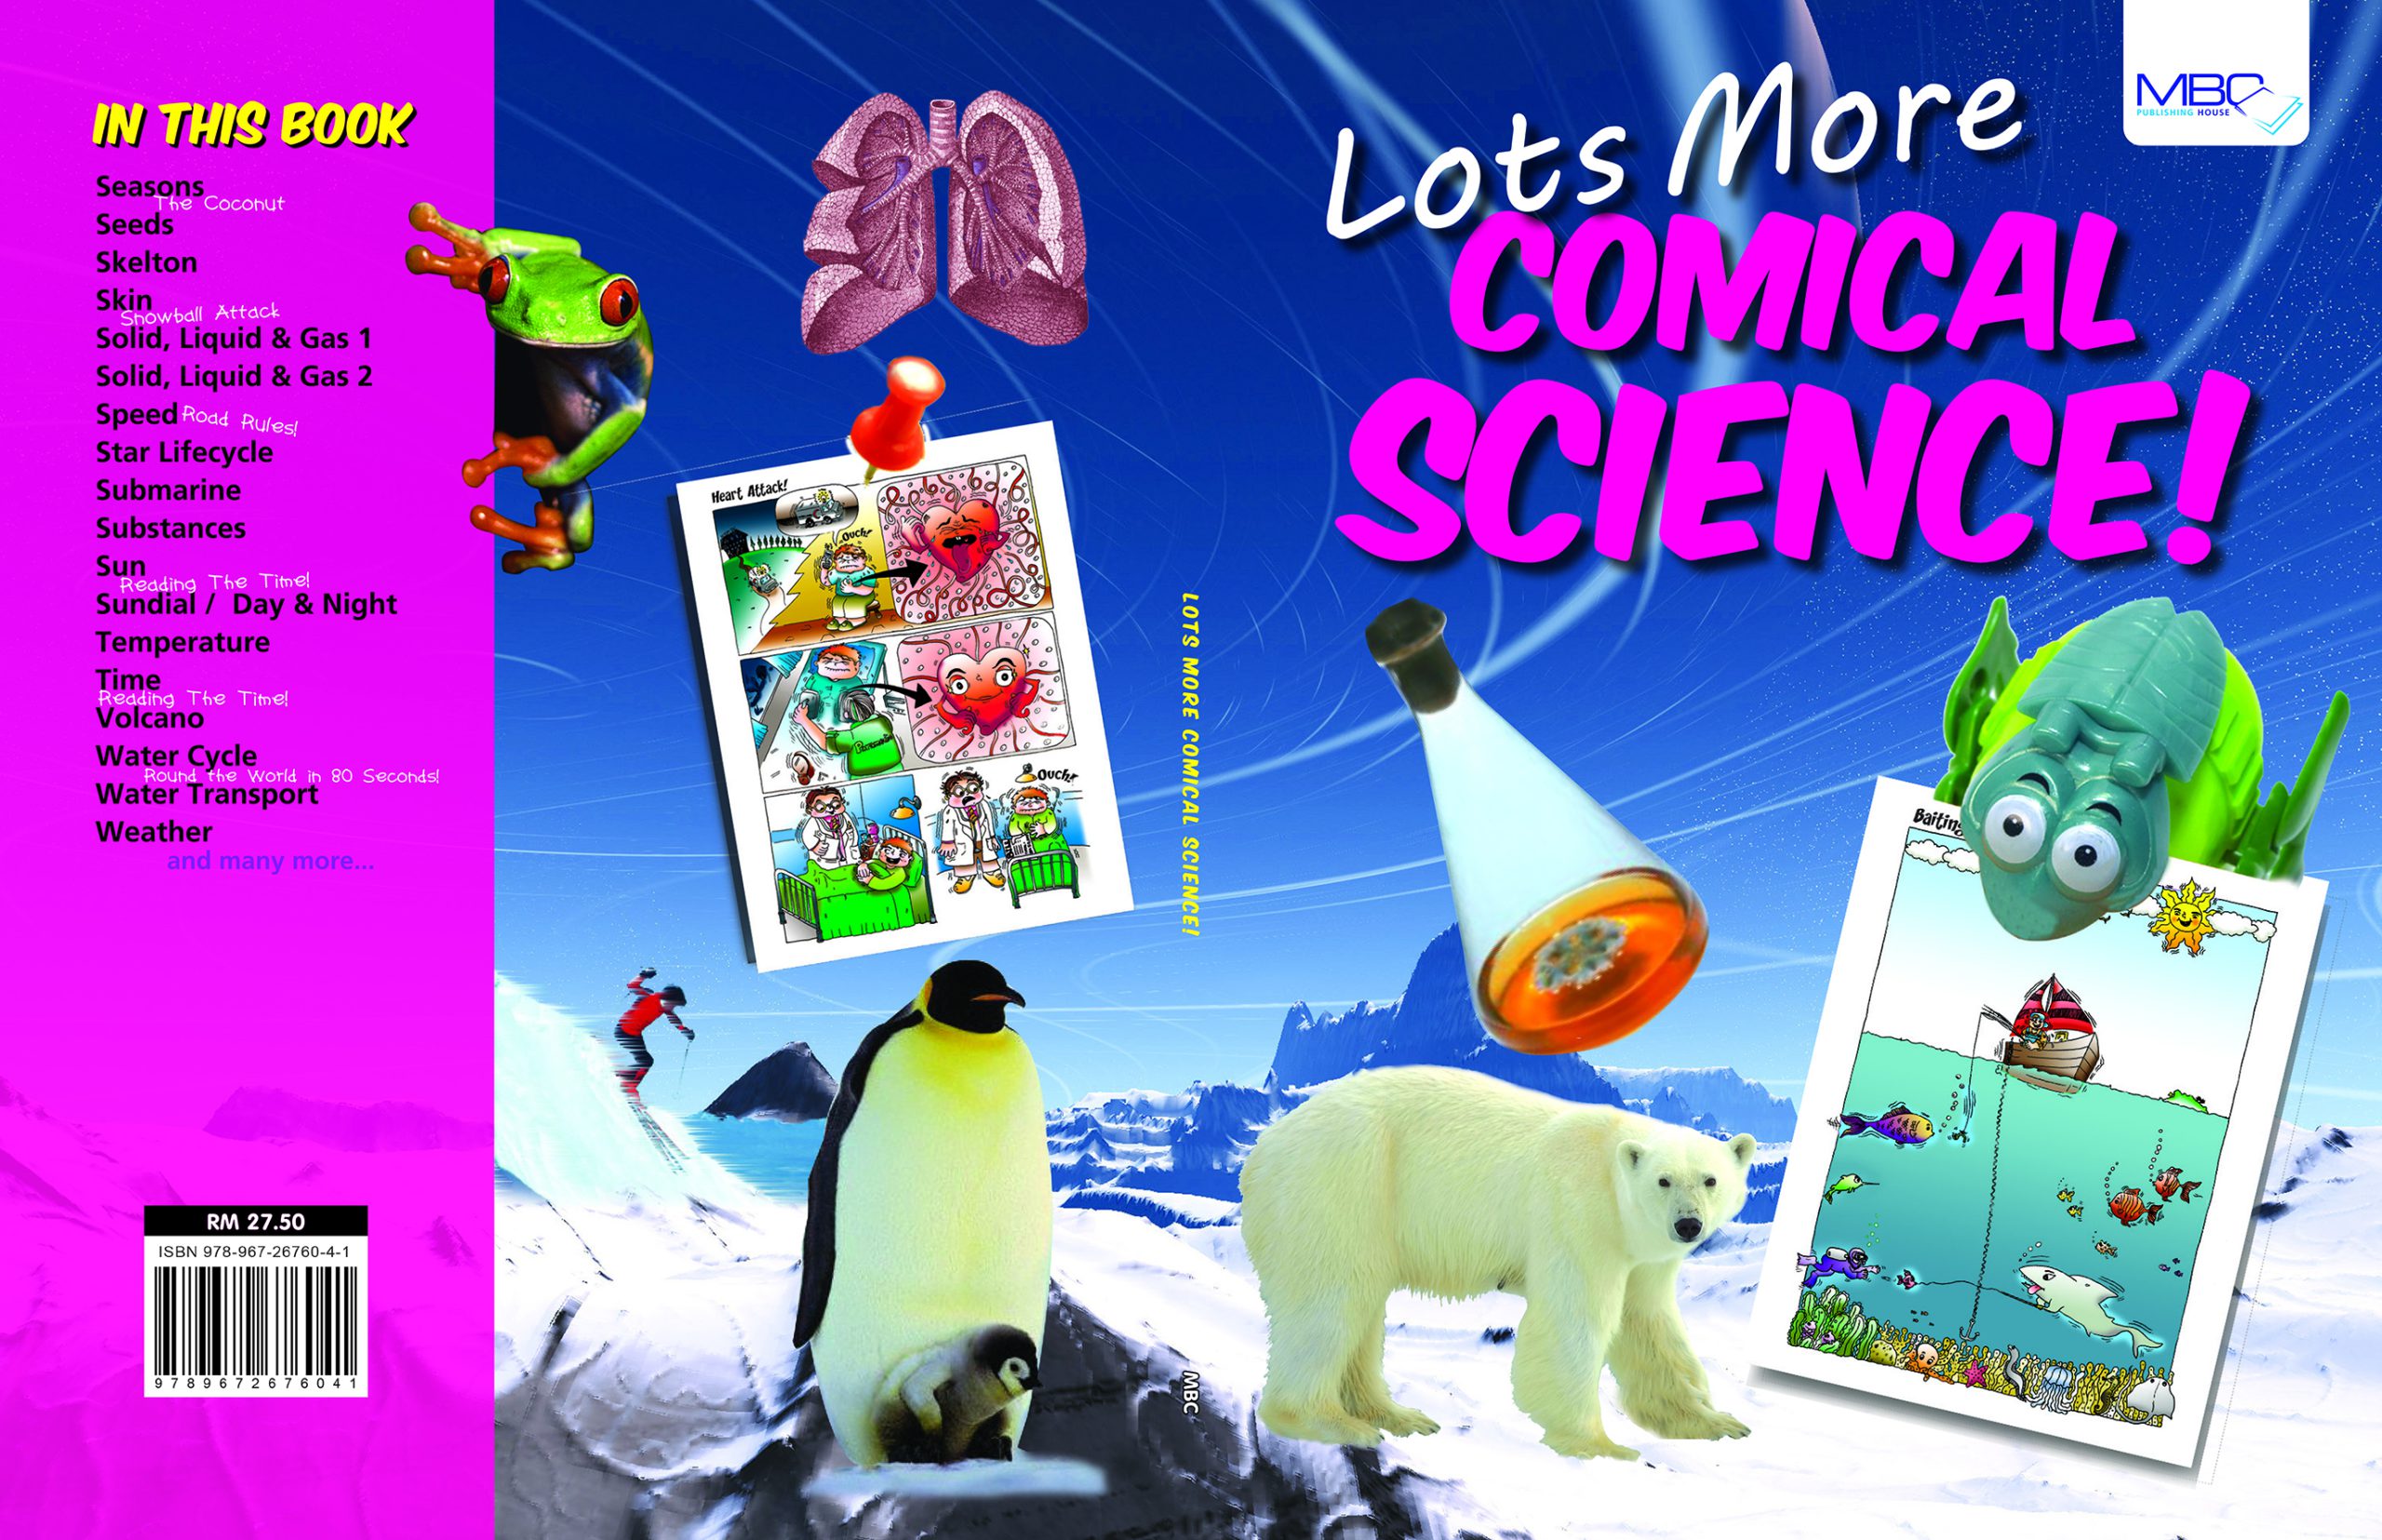 Lots More Comical Science Cover Book 05 (1)